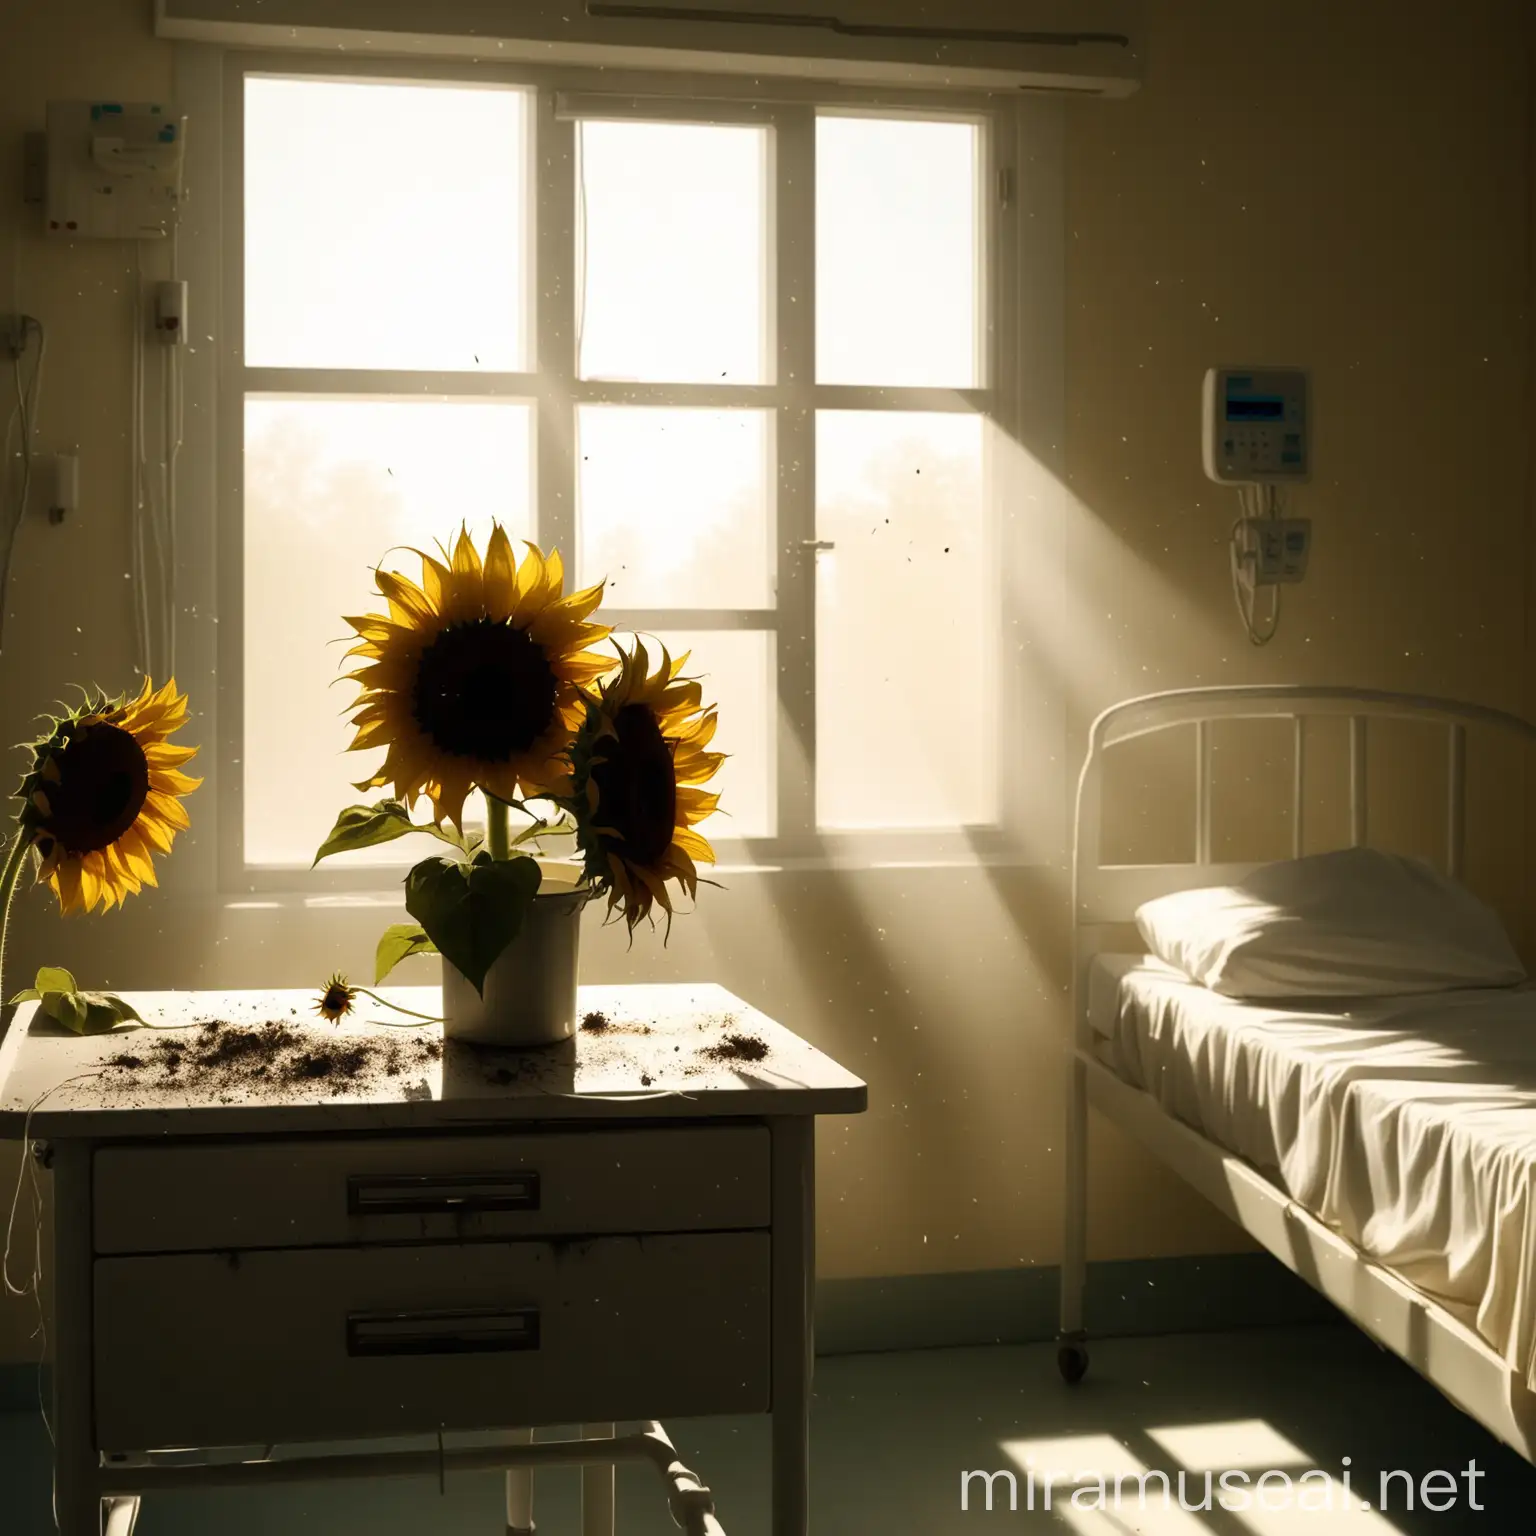 Prompt: A slow pan across a sterile white hospital room. Sunlight streams weakly through a window, illuminating dust motes dancing in the air. A single, wilting sunflower sits on a bedside table.